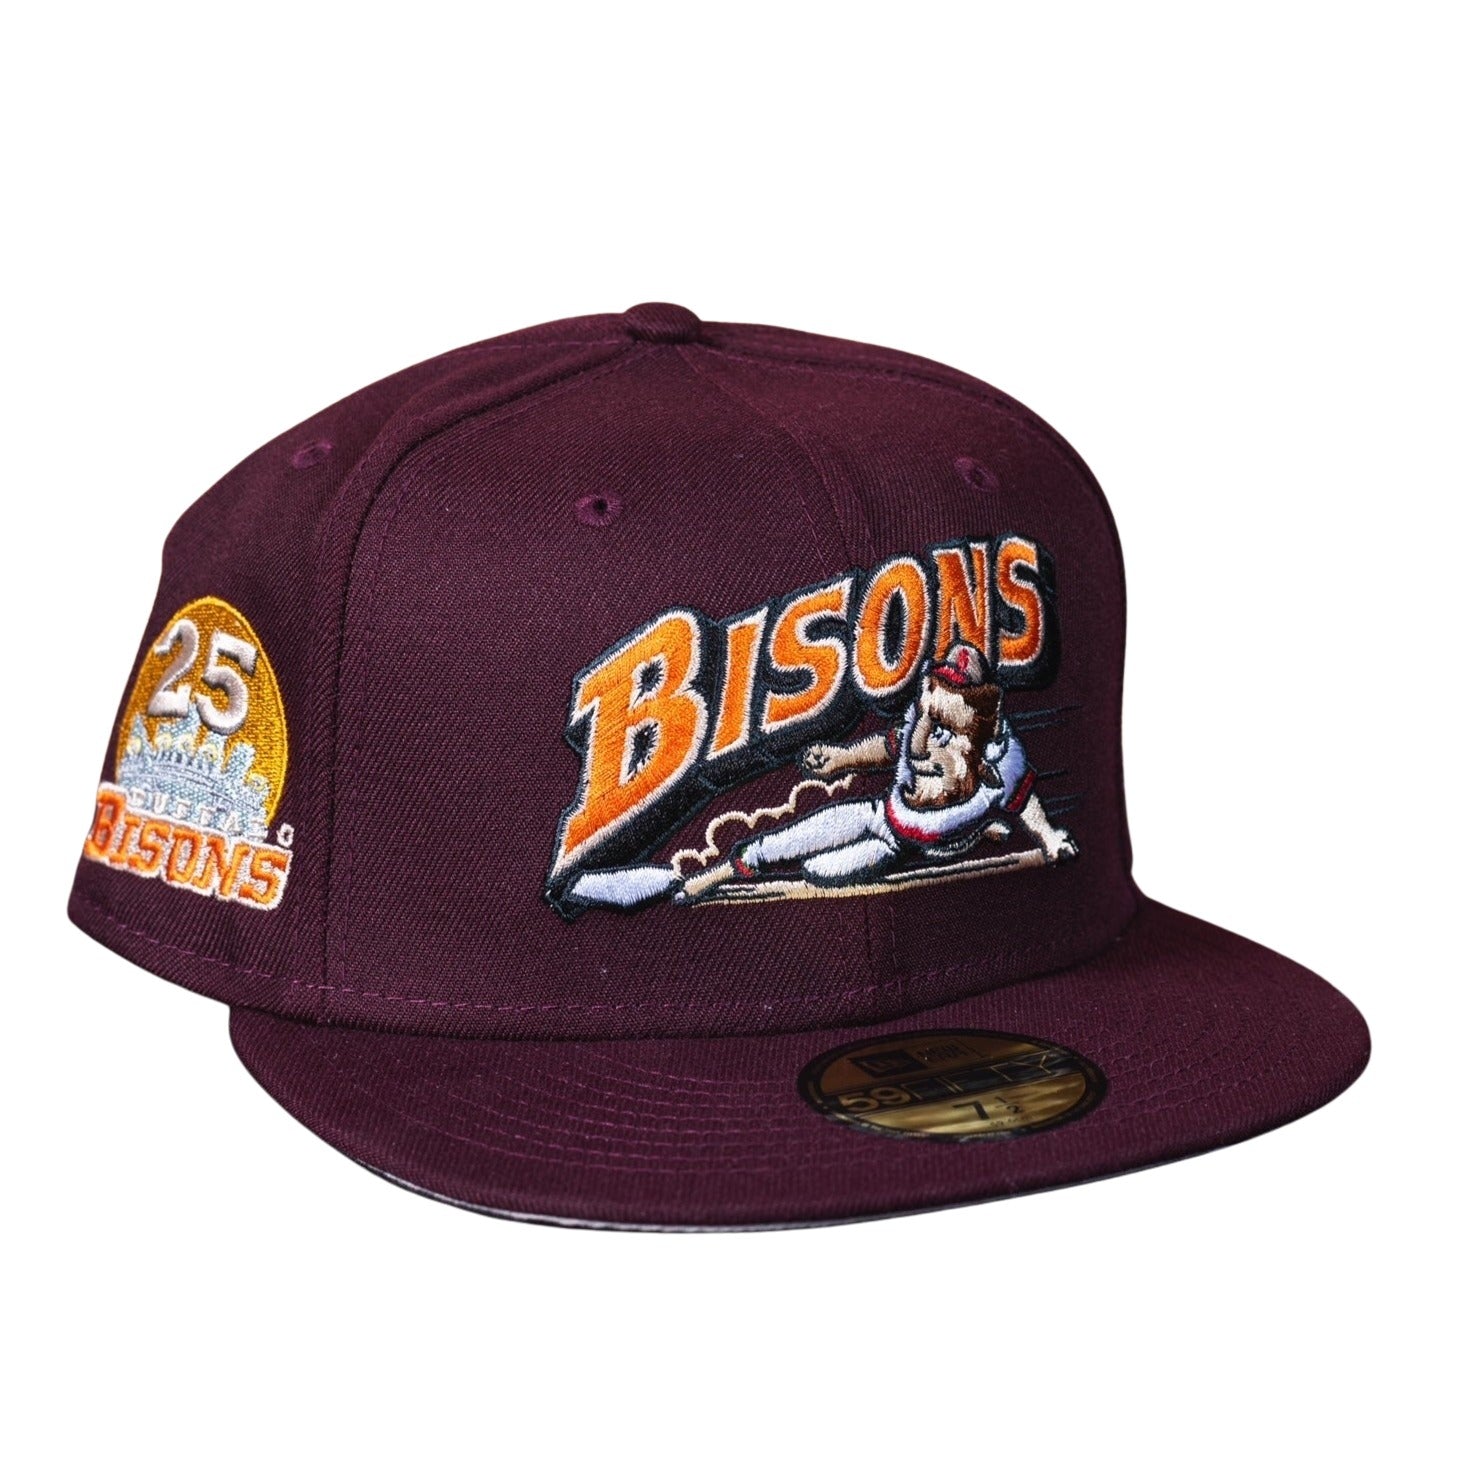 Buffalo Bison x Kicking it 25th Anniversary Fitted Cap